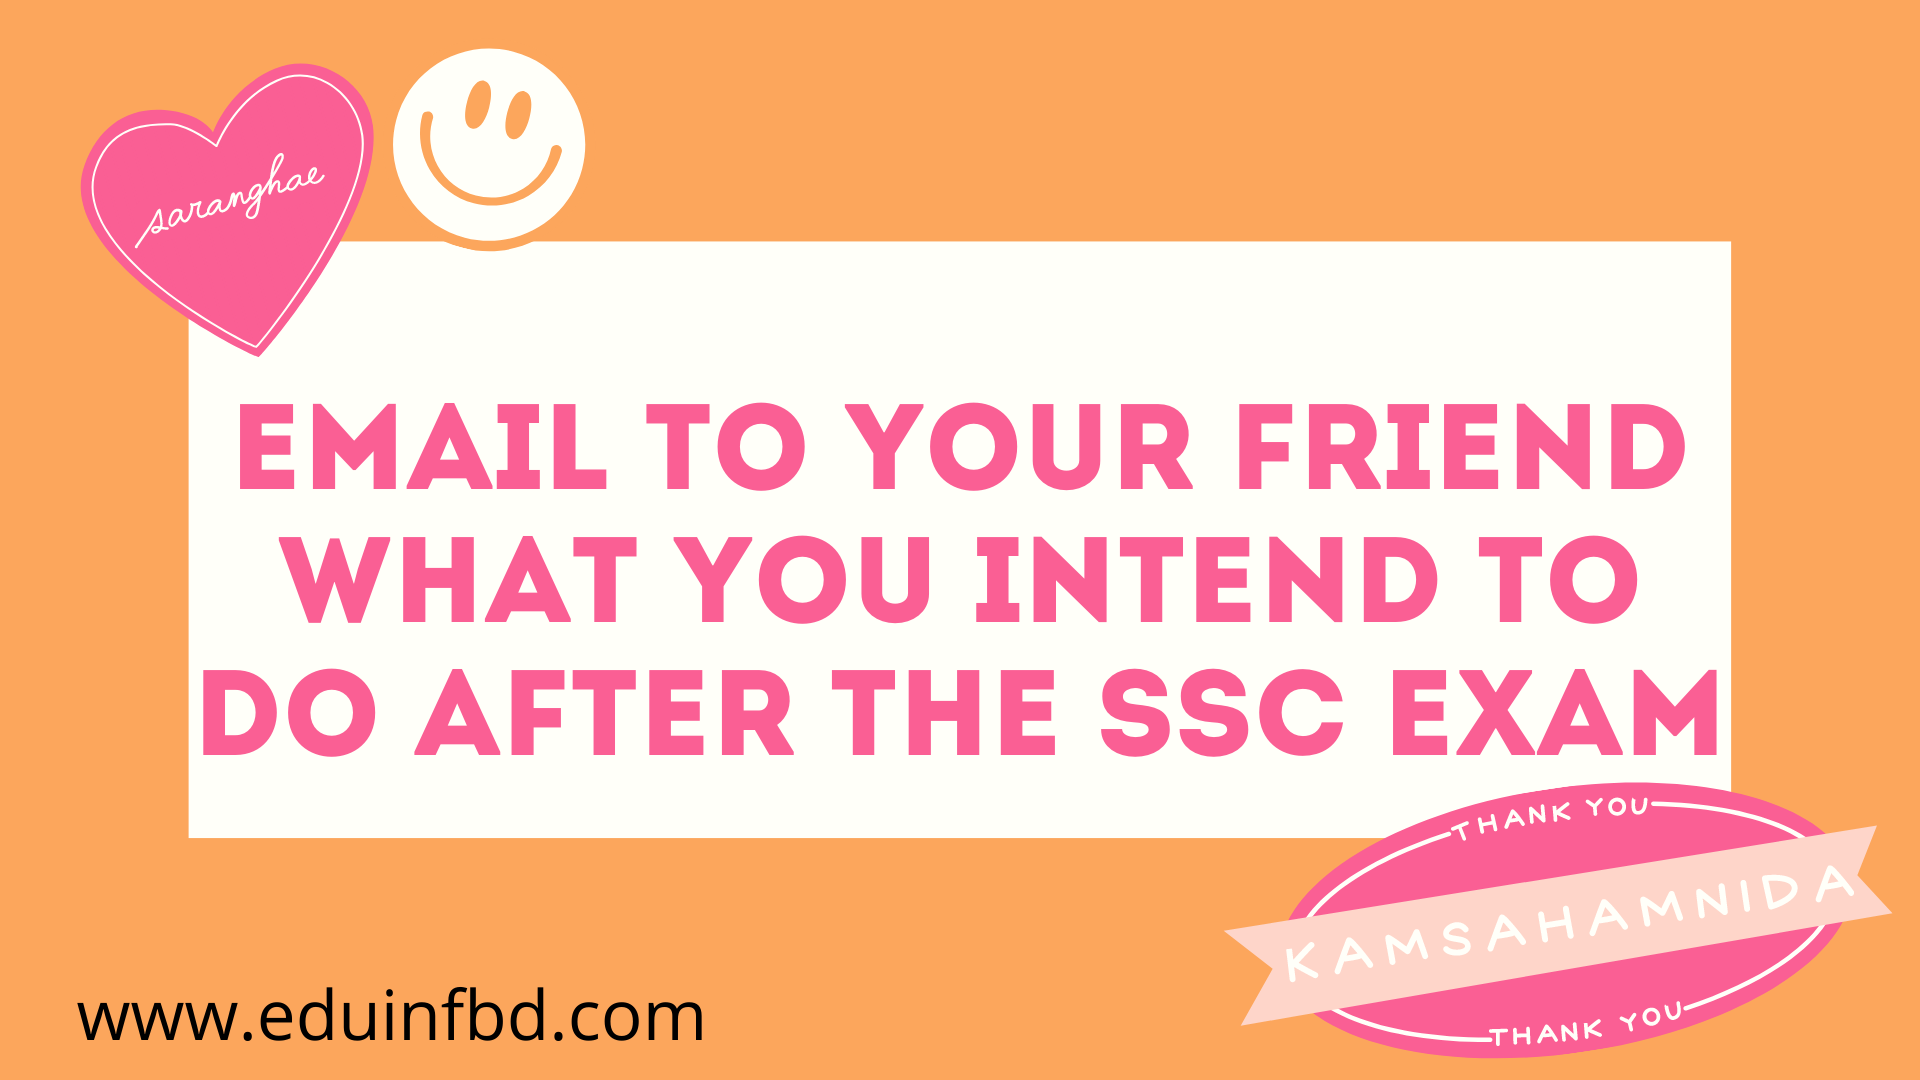 Email to friend what you intend to do after the ssc